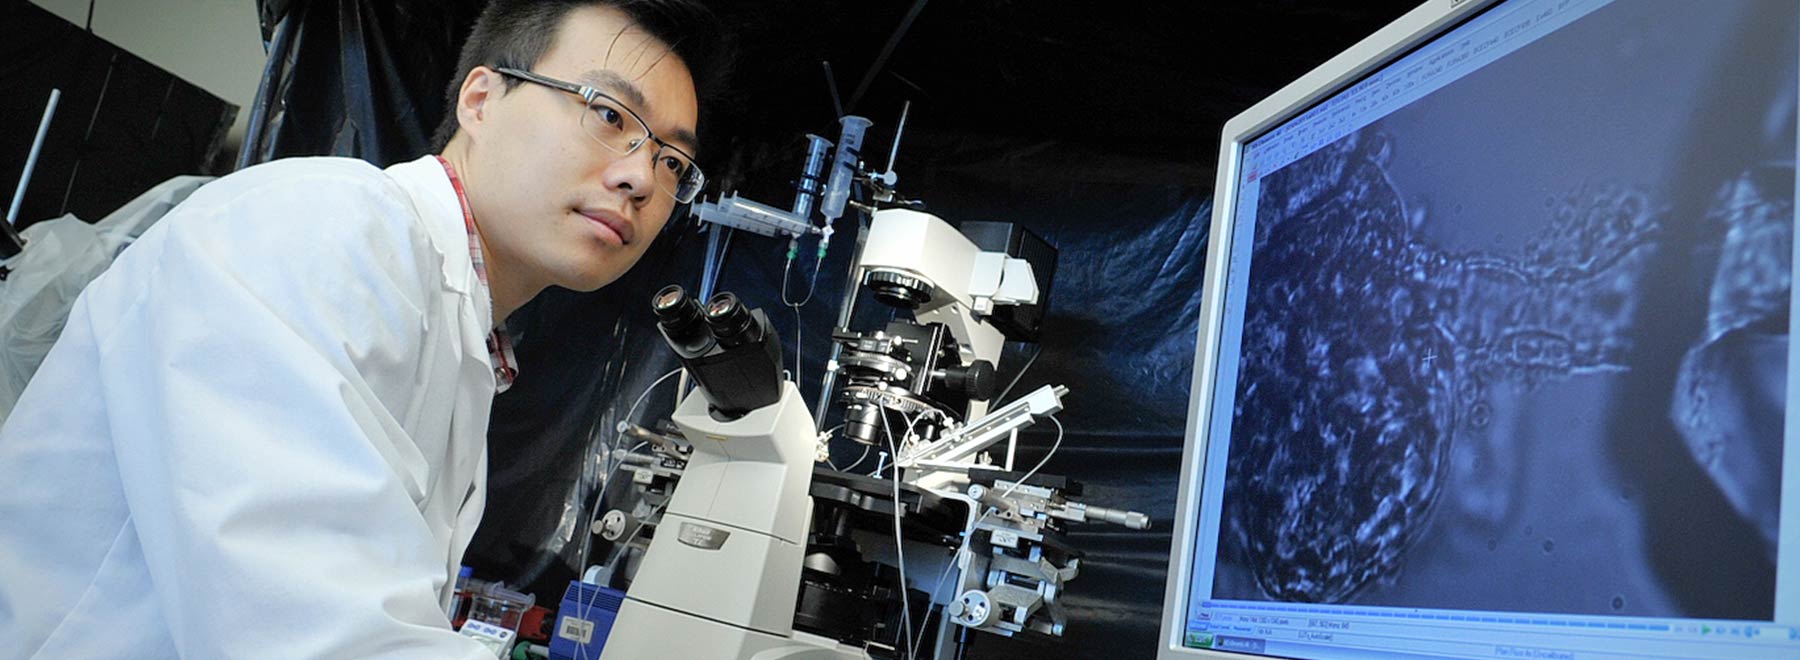 Researcher looking at microscope findings on a monitor.